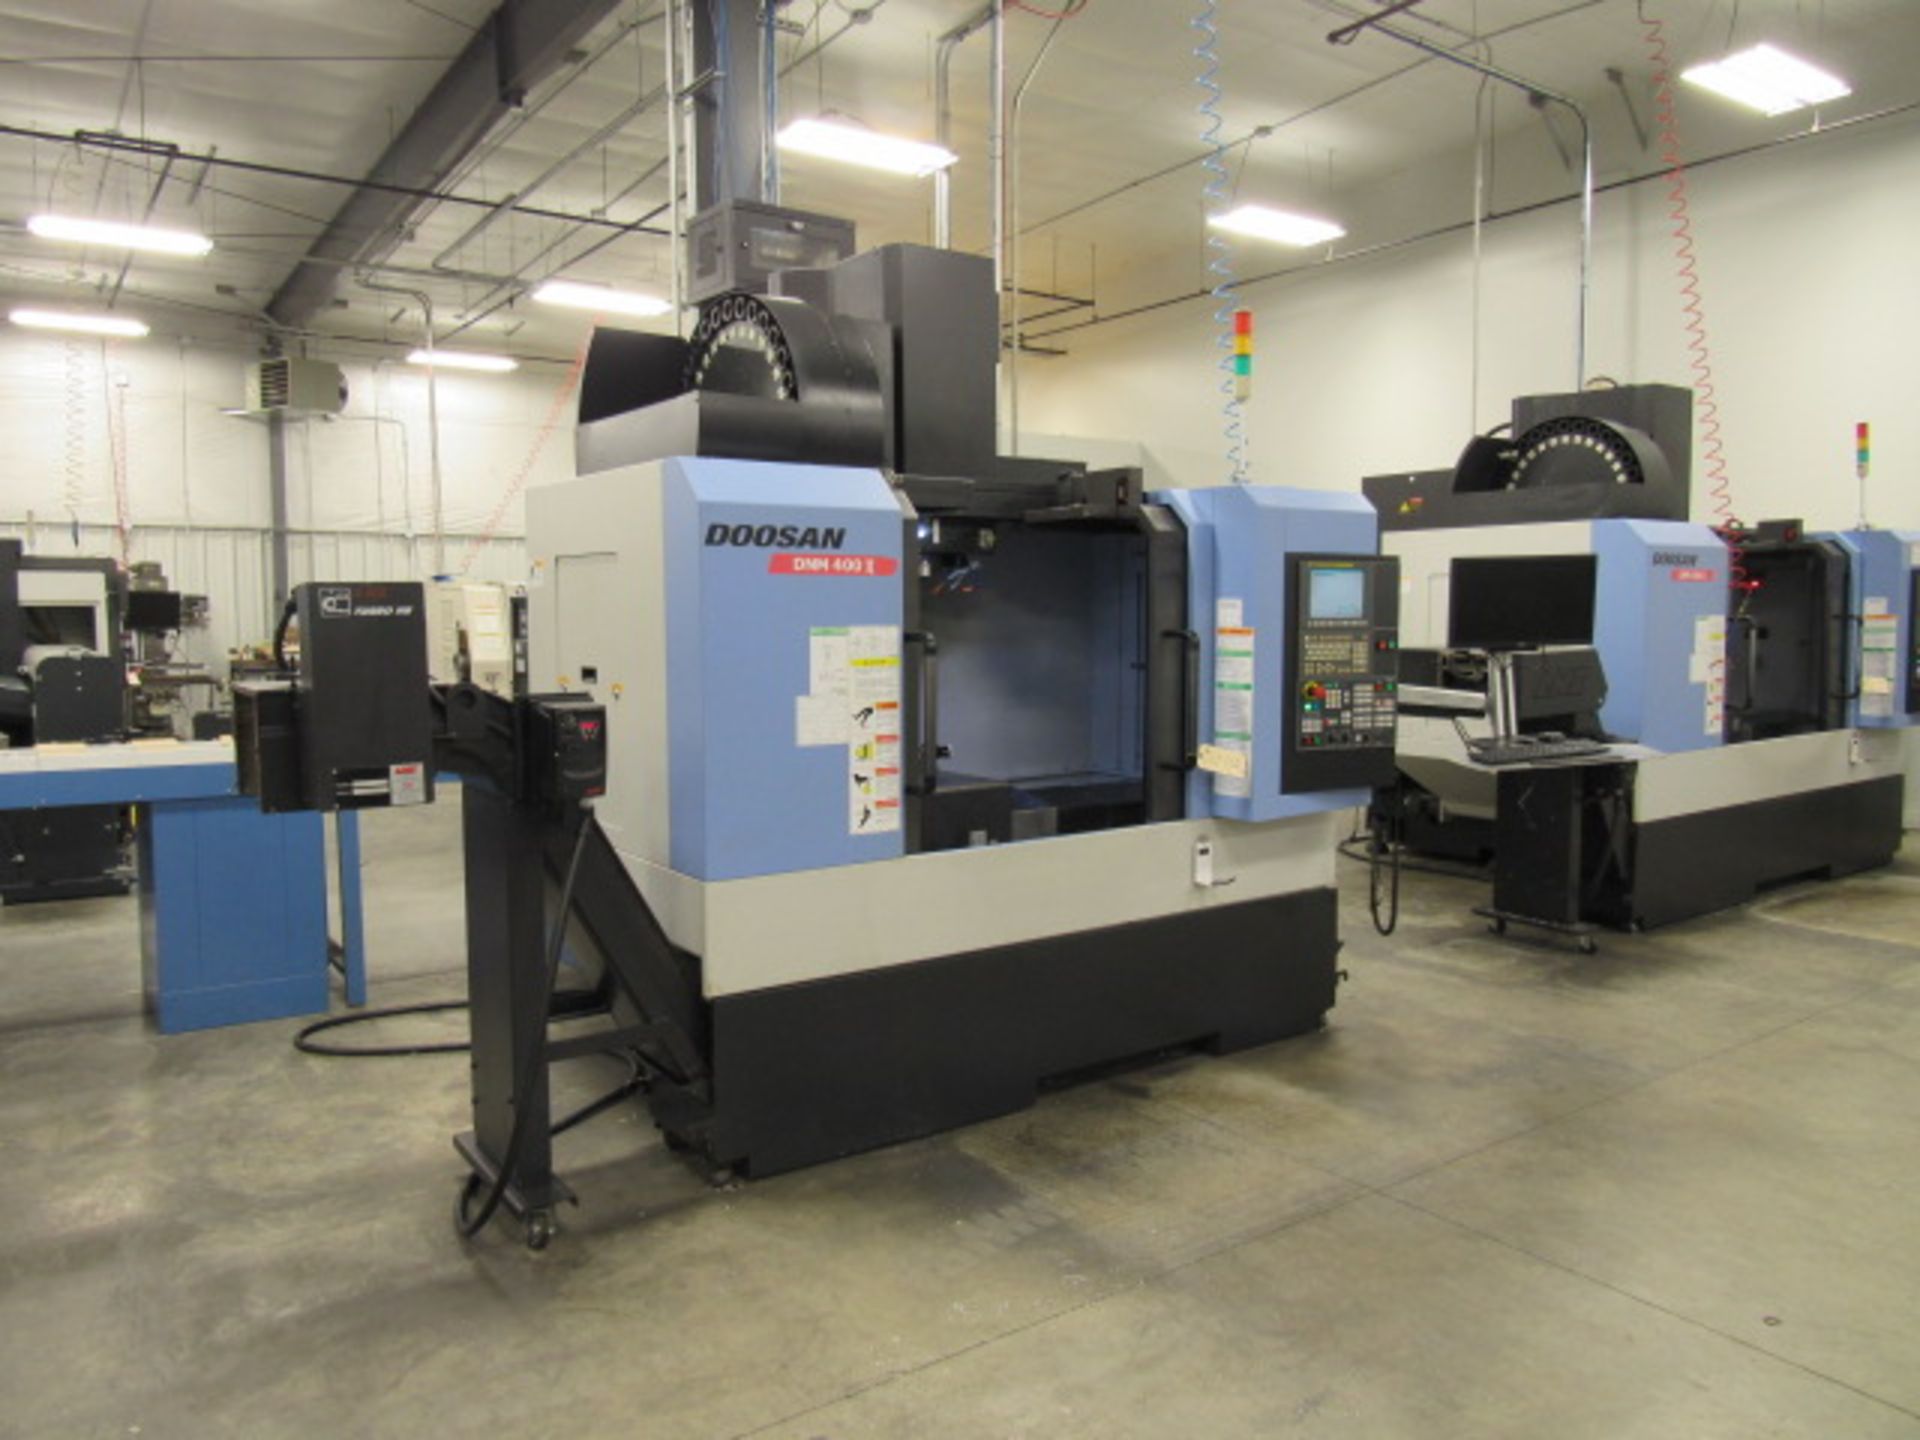 Doosan DNM400II CNC Vertical Machining Center with 36.2'' x 17.1'' Table, Big Plus #40, Spindle - Image 5 of 9